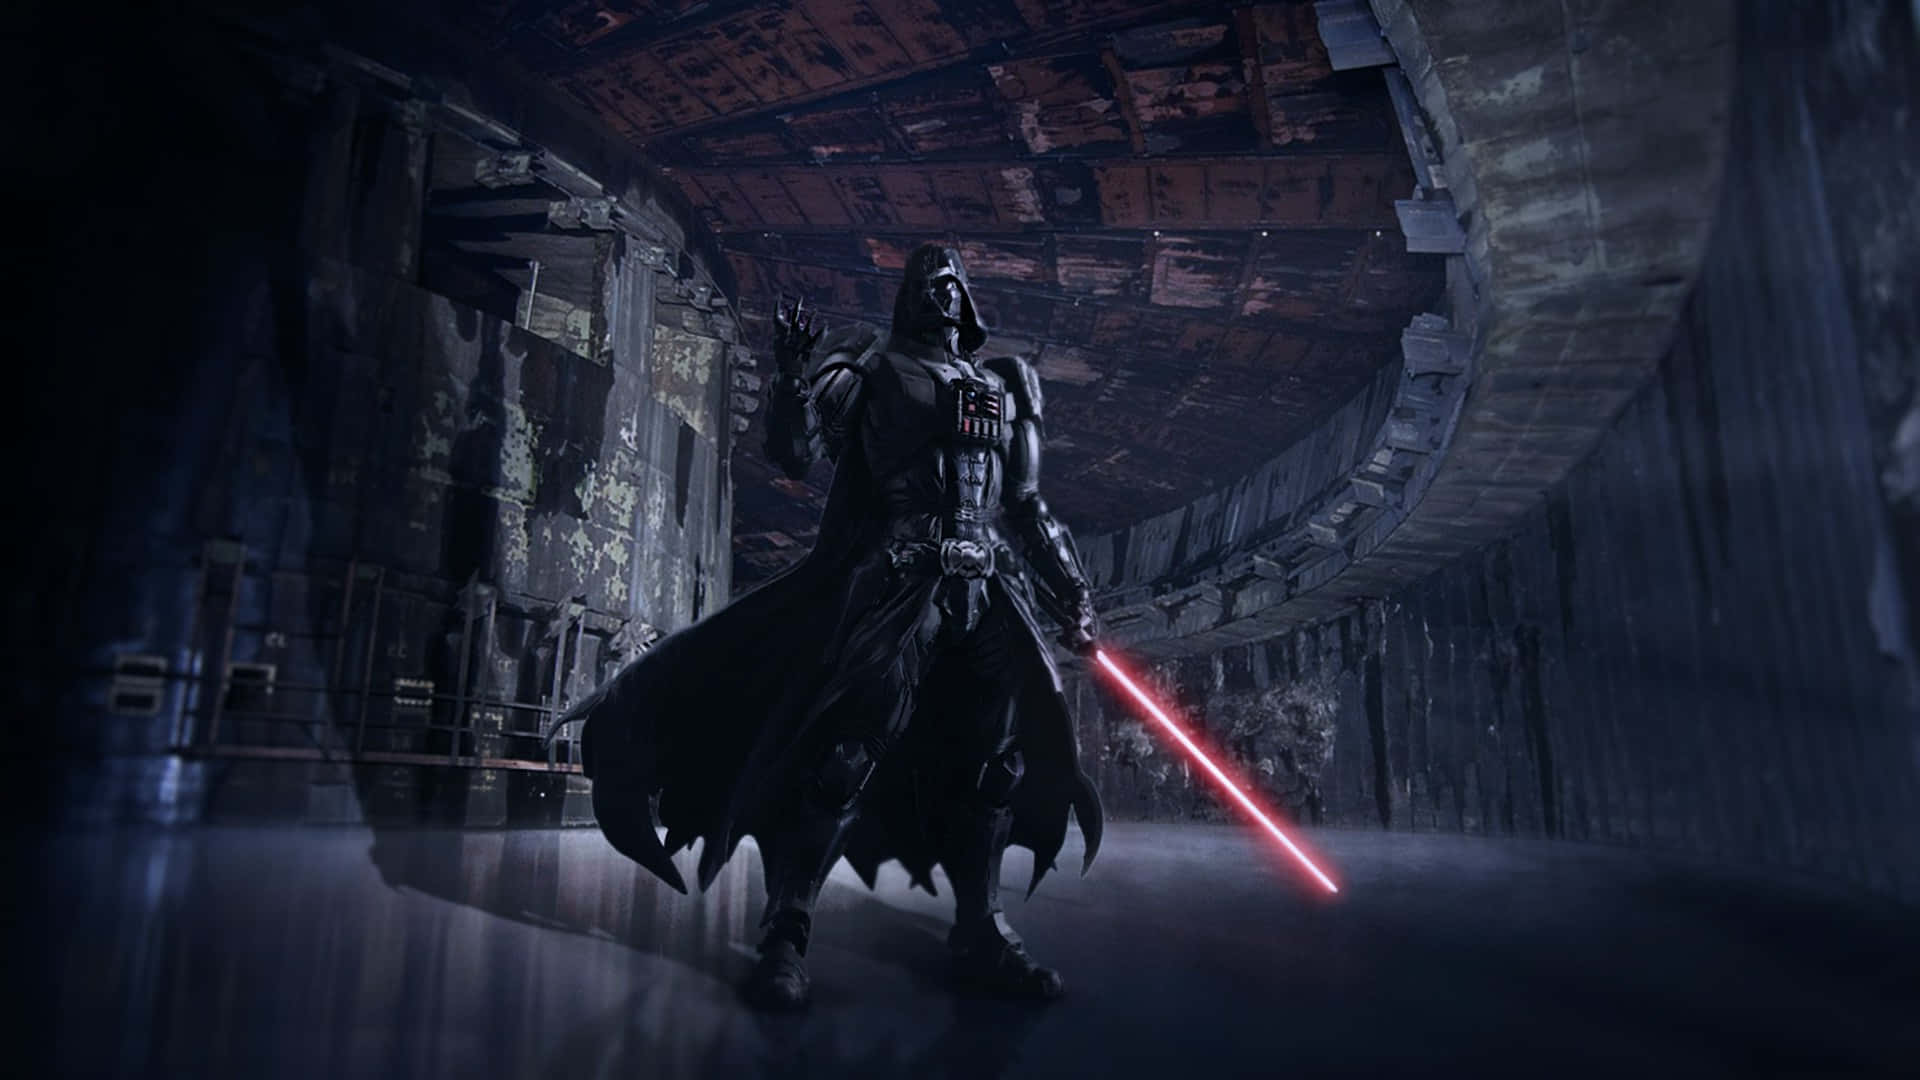 Darth Vader - The Dark Lord of the Sith